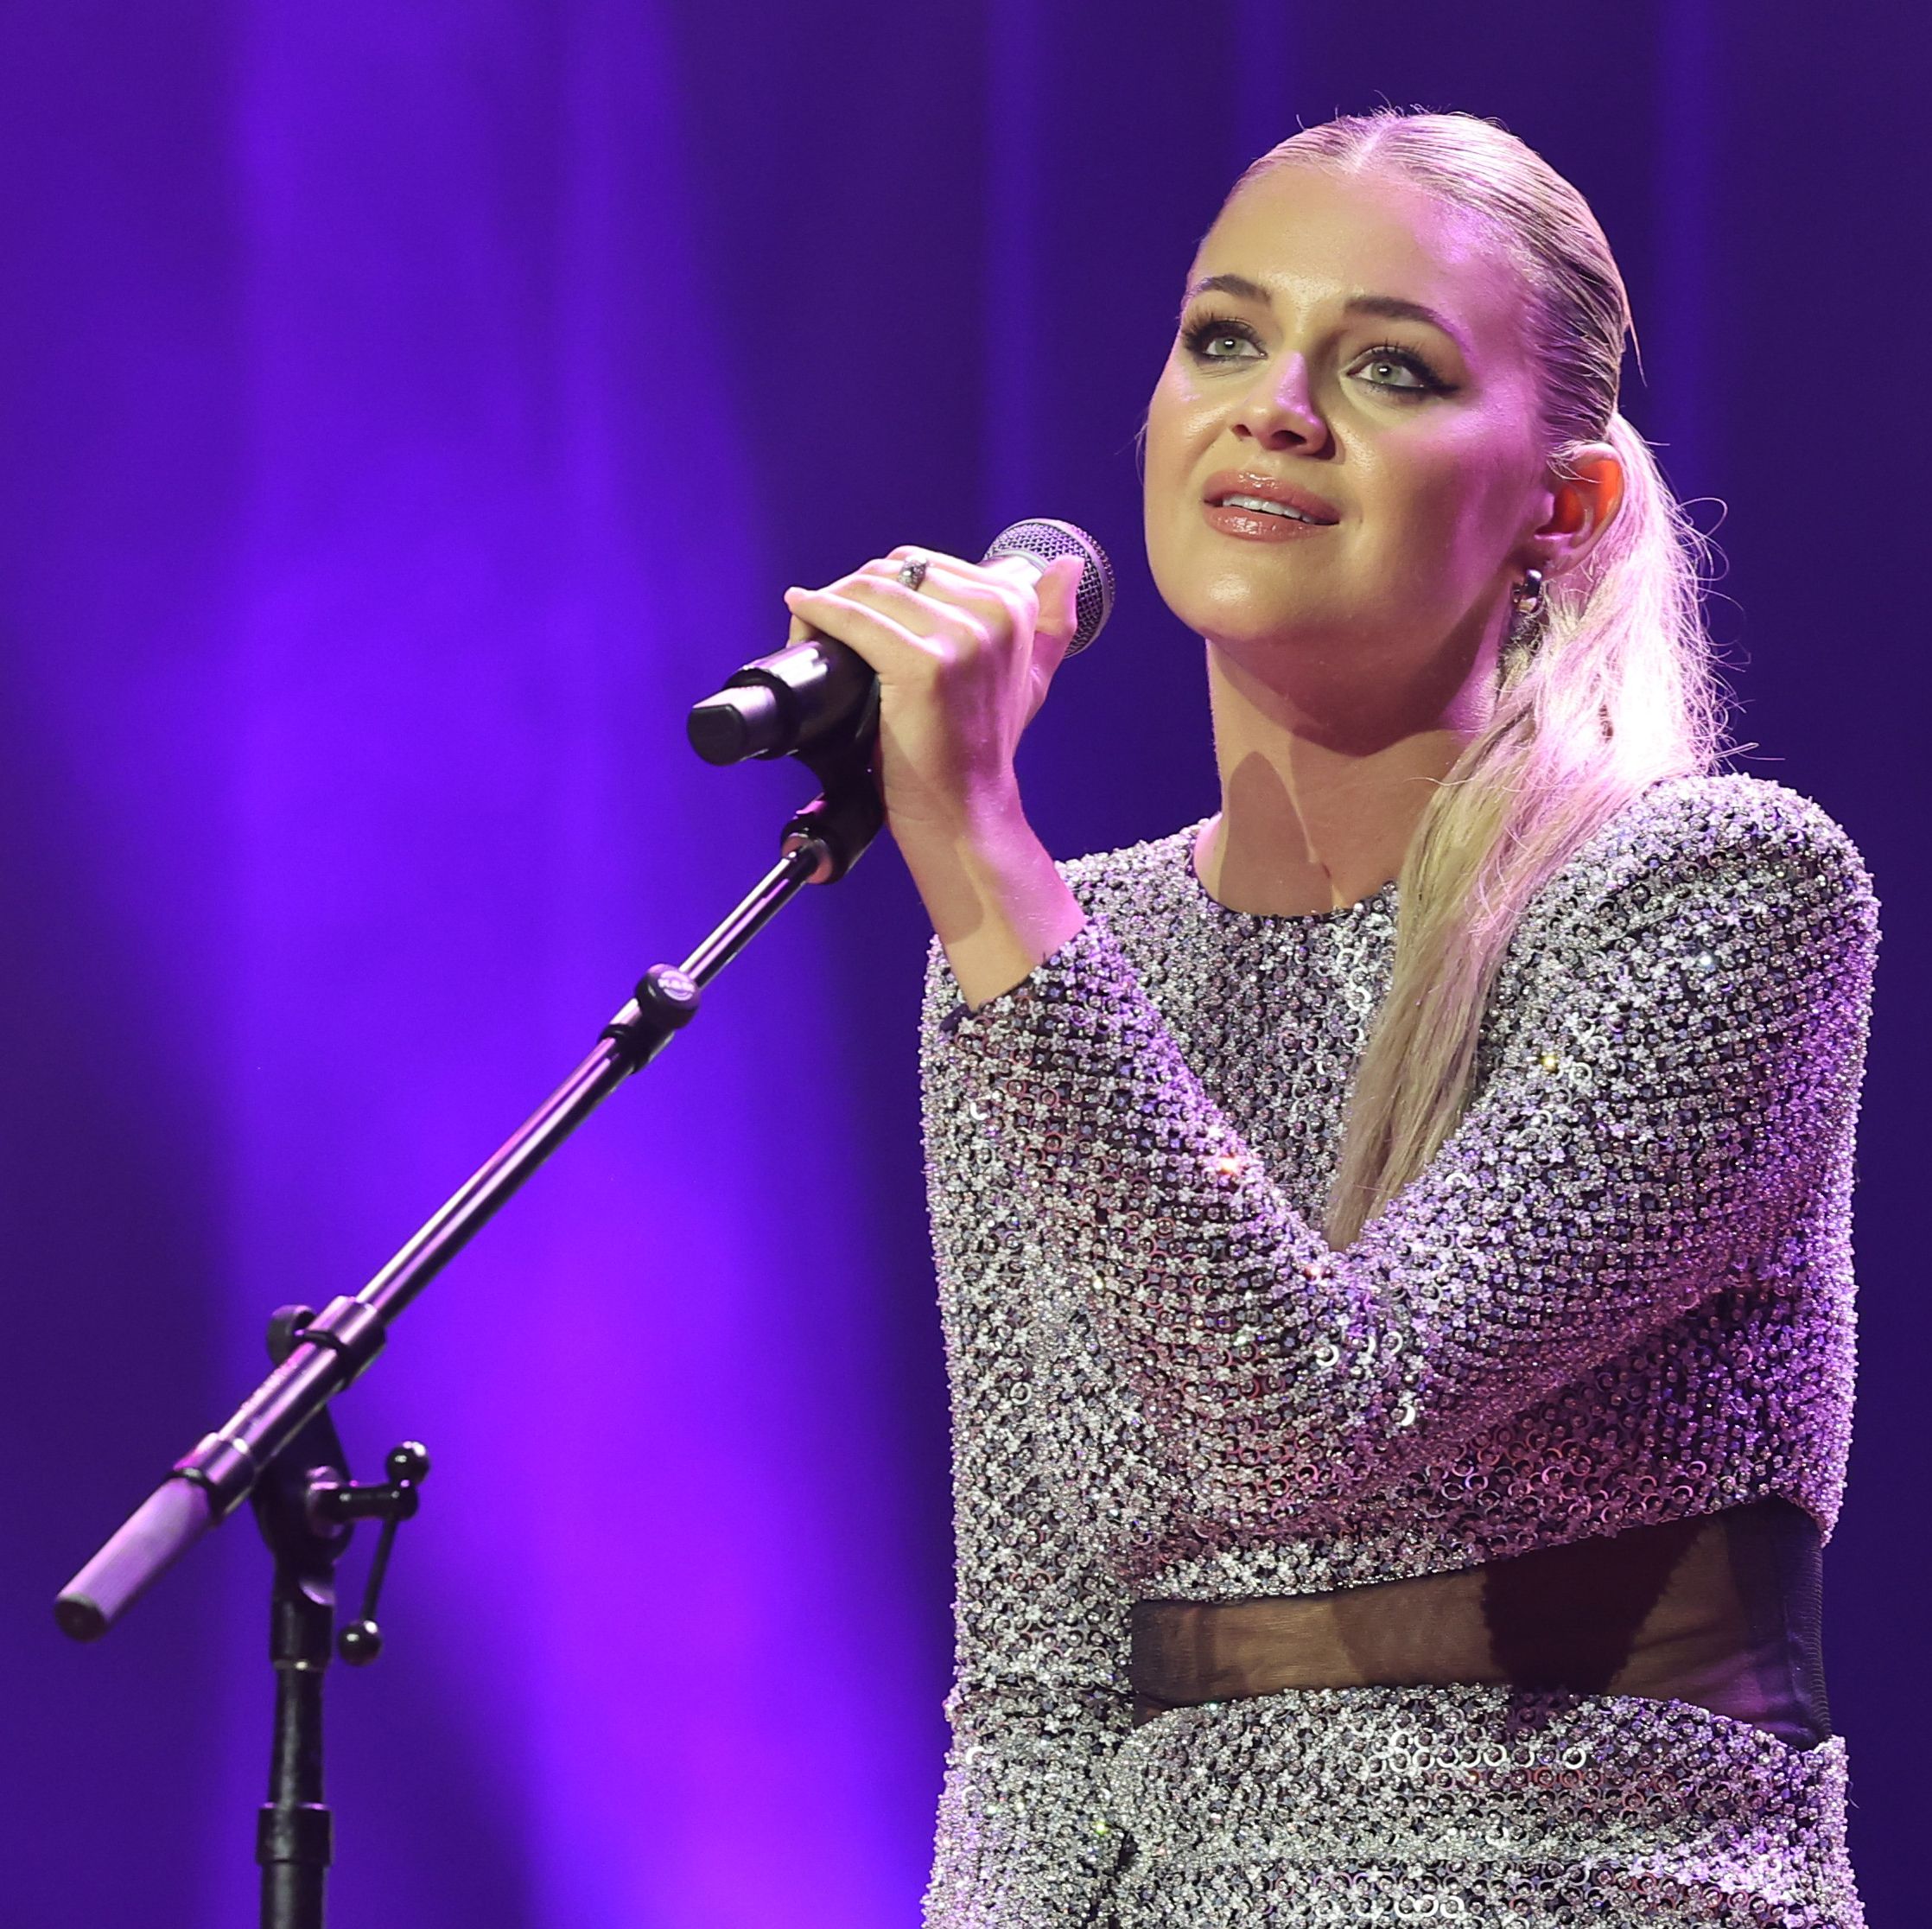 A Fan Hit Kelsea Ballerini With an Object Mid-Concert and She Had to Pause Her Performance